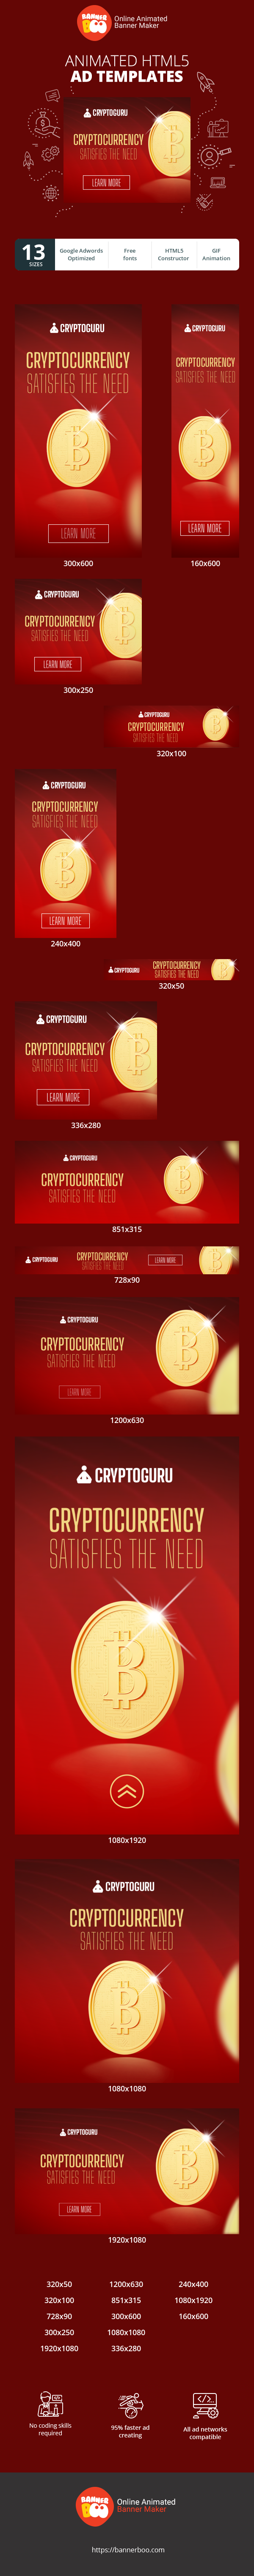 Banner ad template — Cryptocurrency — Satisfies The Need